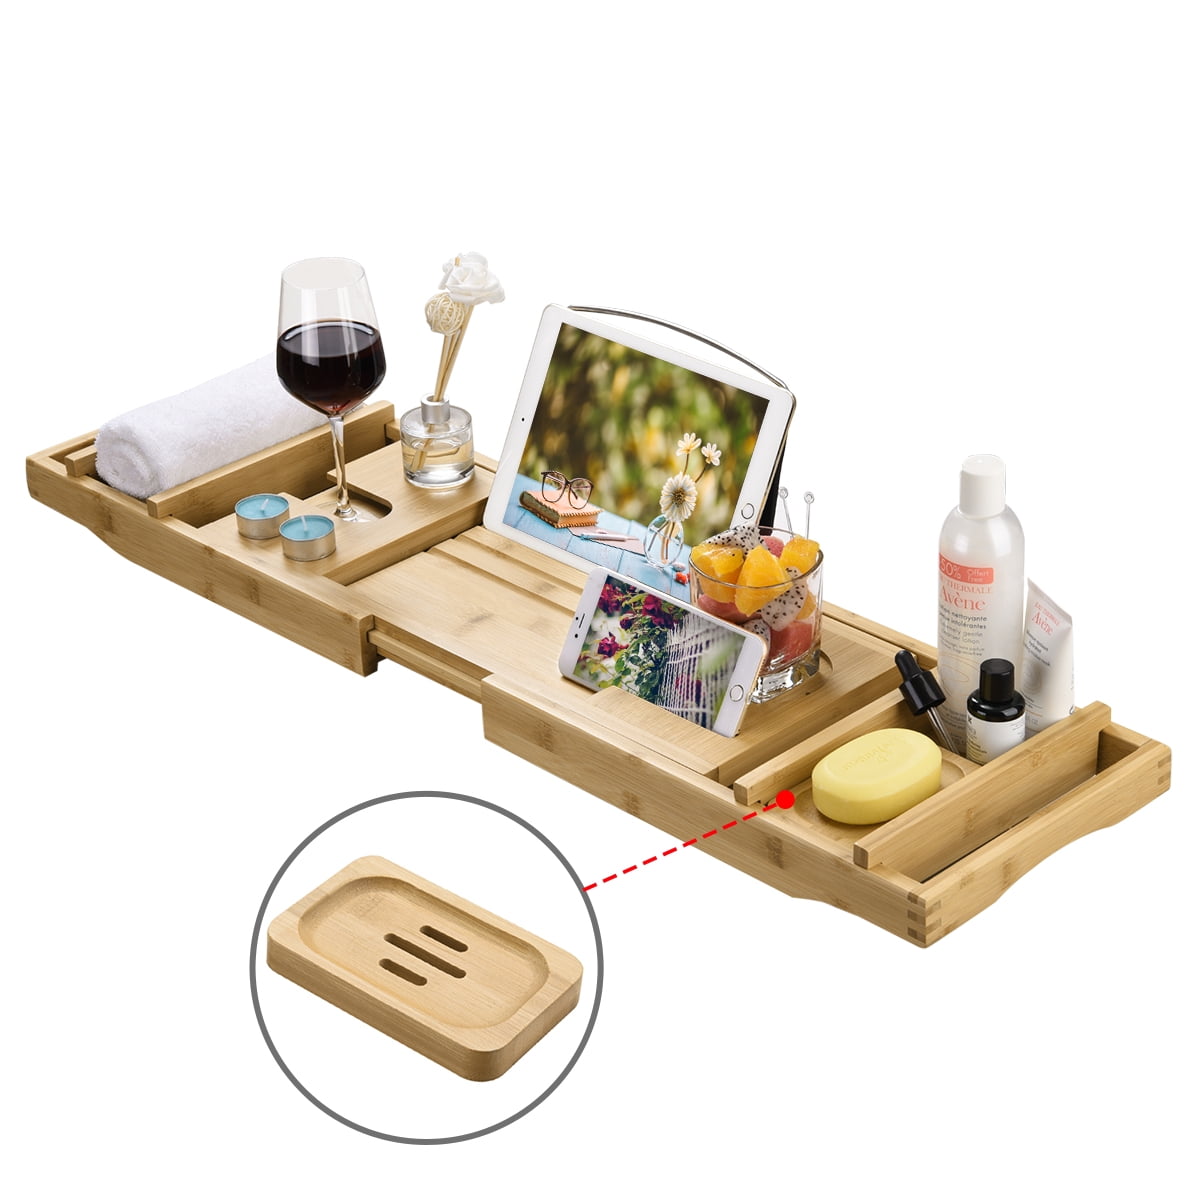 Wooden Pink Bath Rack Caddy Bathtub Tray Wine Glass Holder And Tablet/Phone Slot 